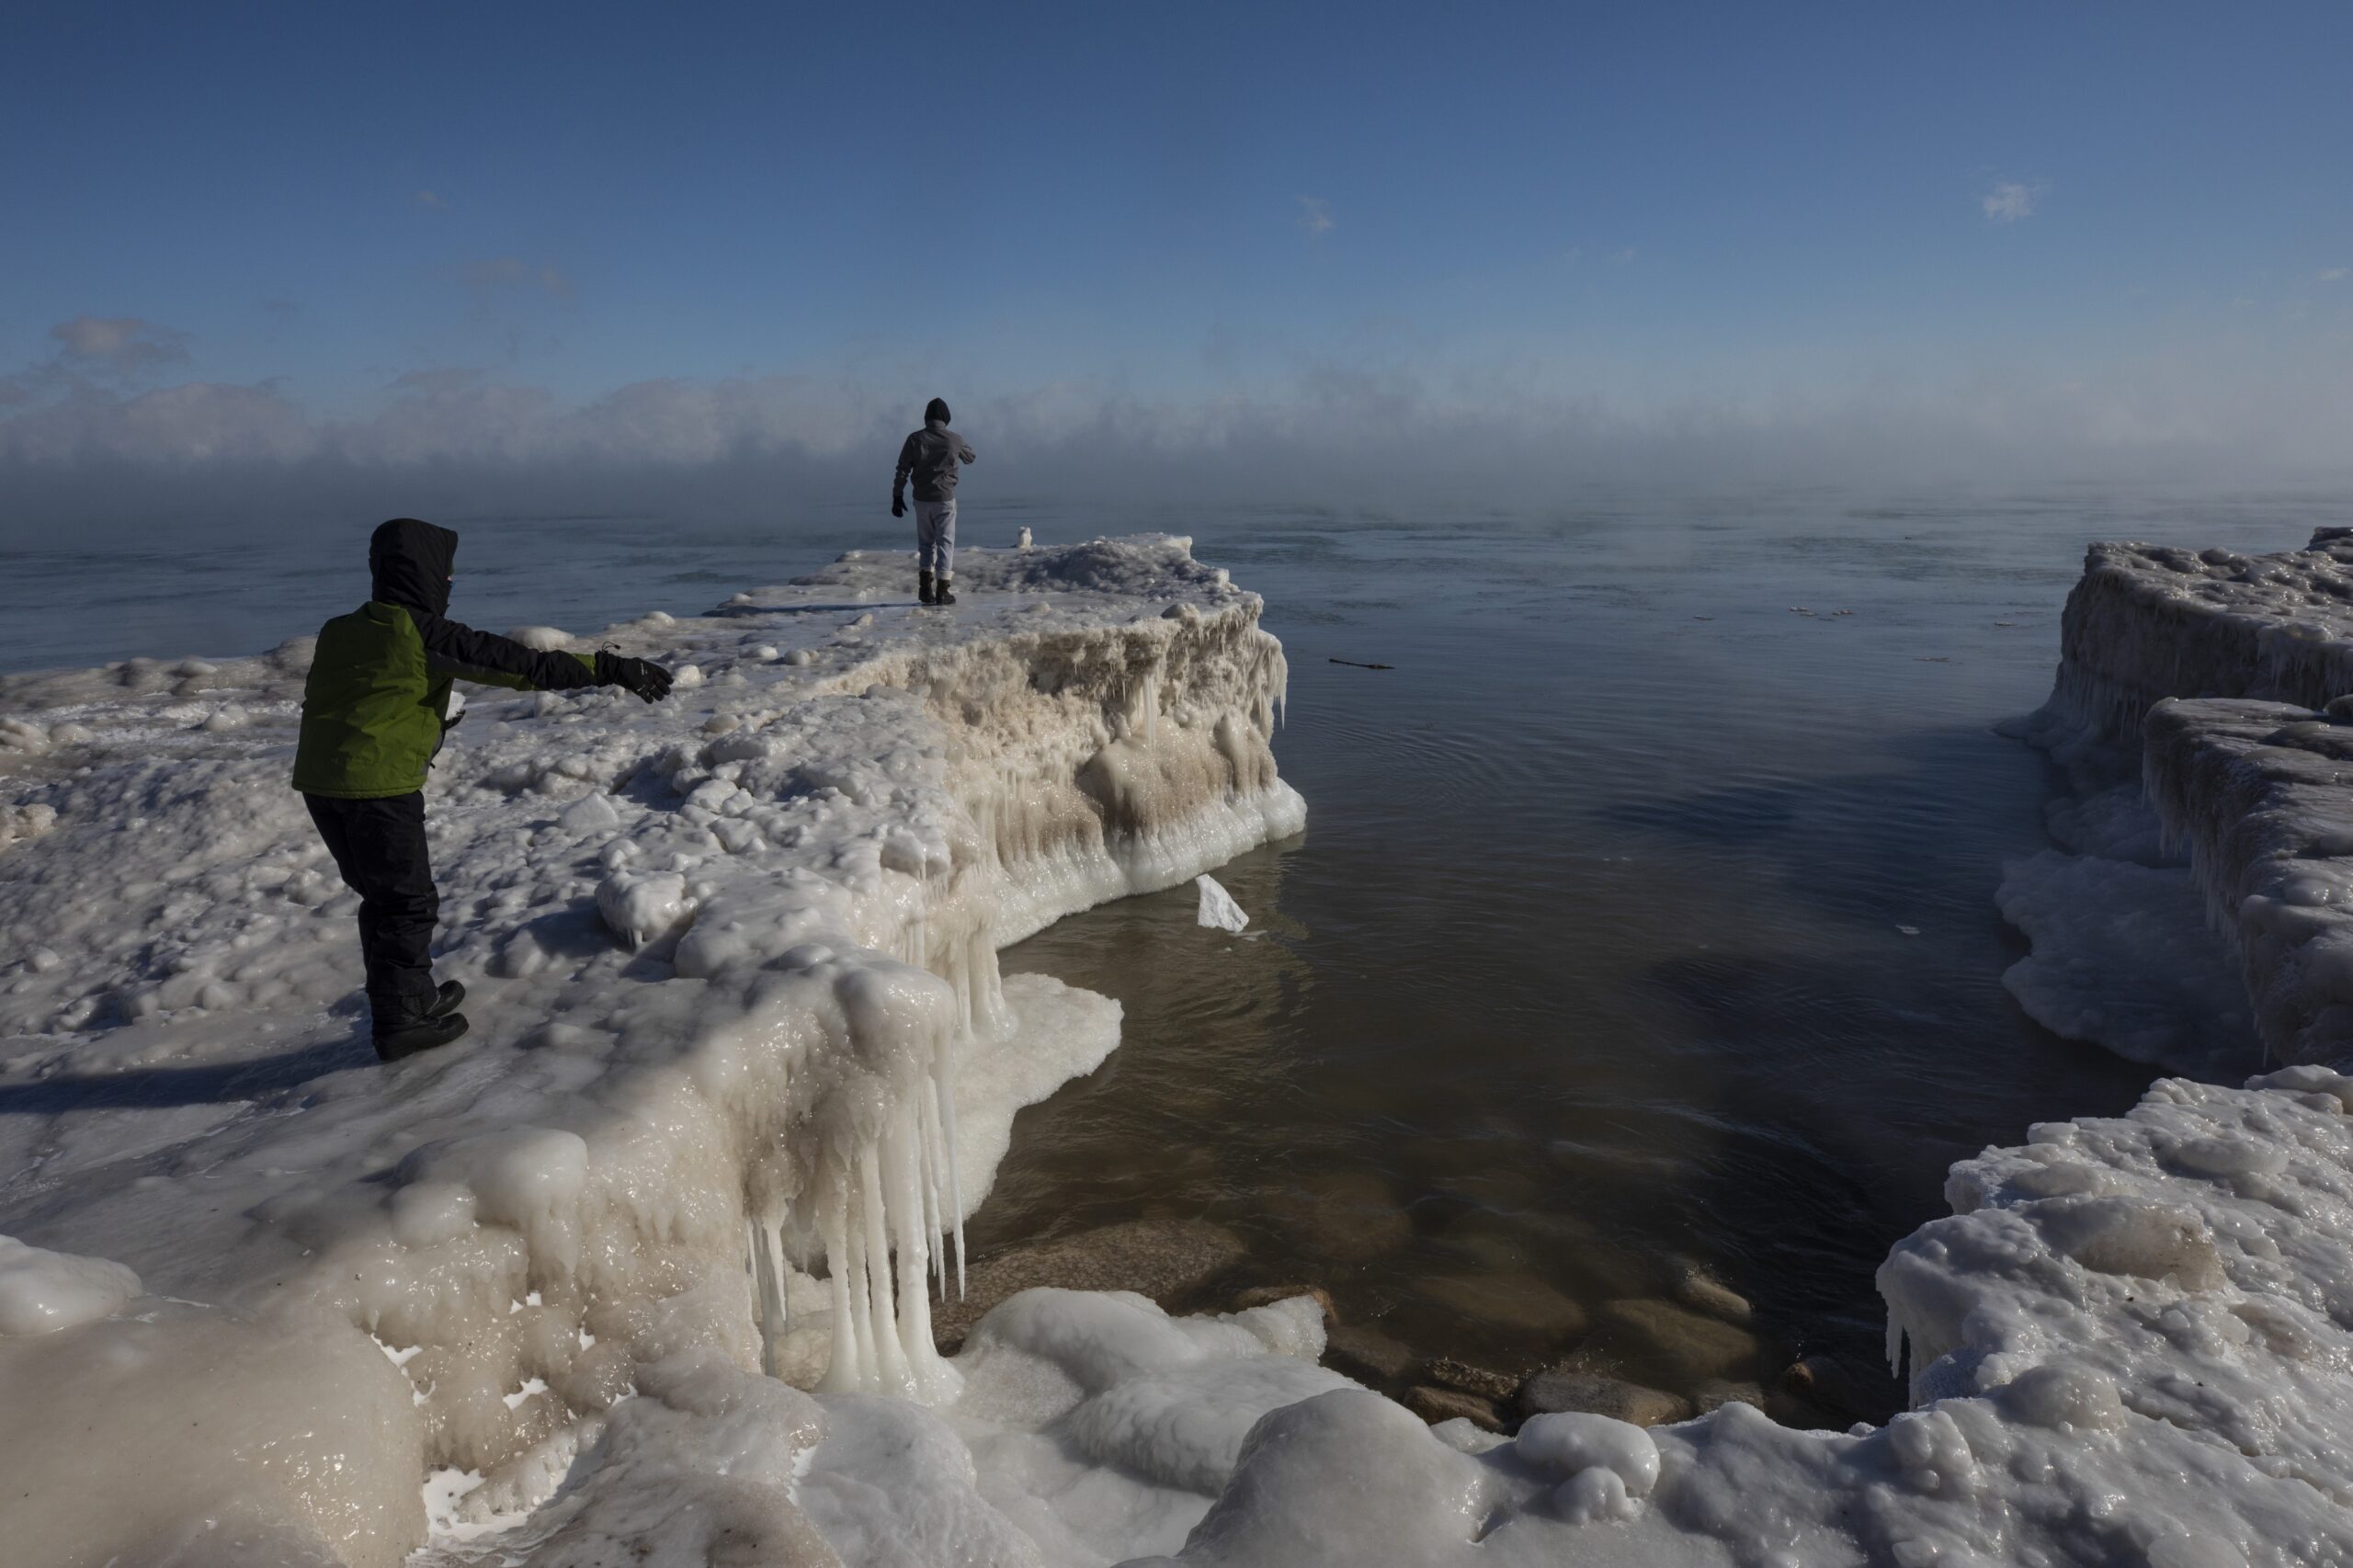 Average ice cover on the Great Lakes this year ties for third-lowest on record